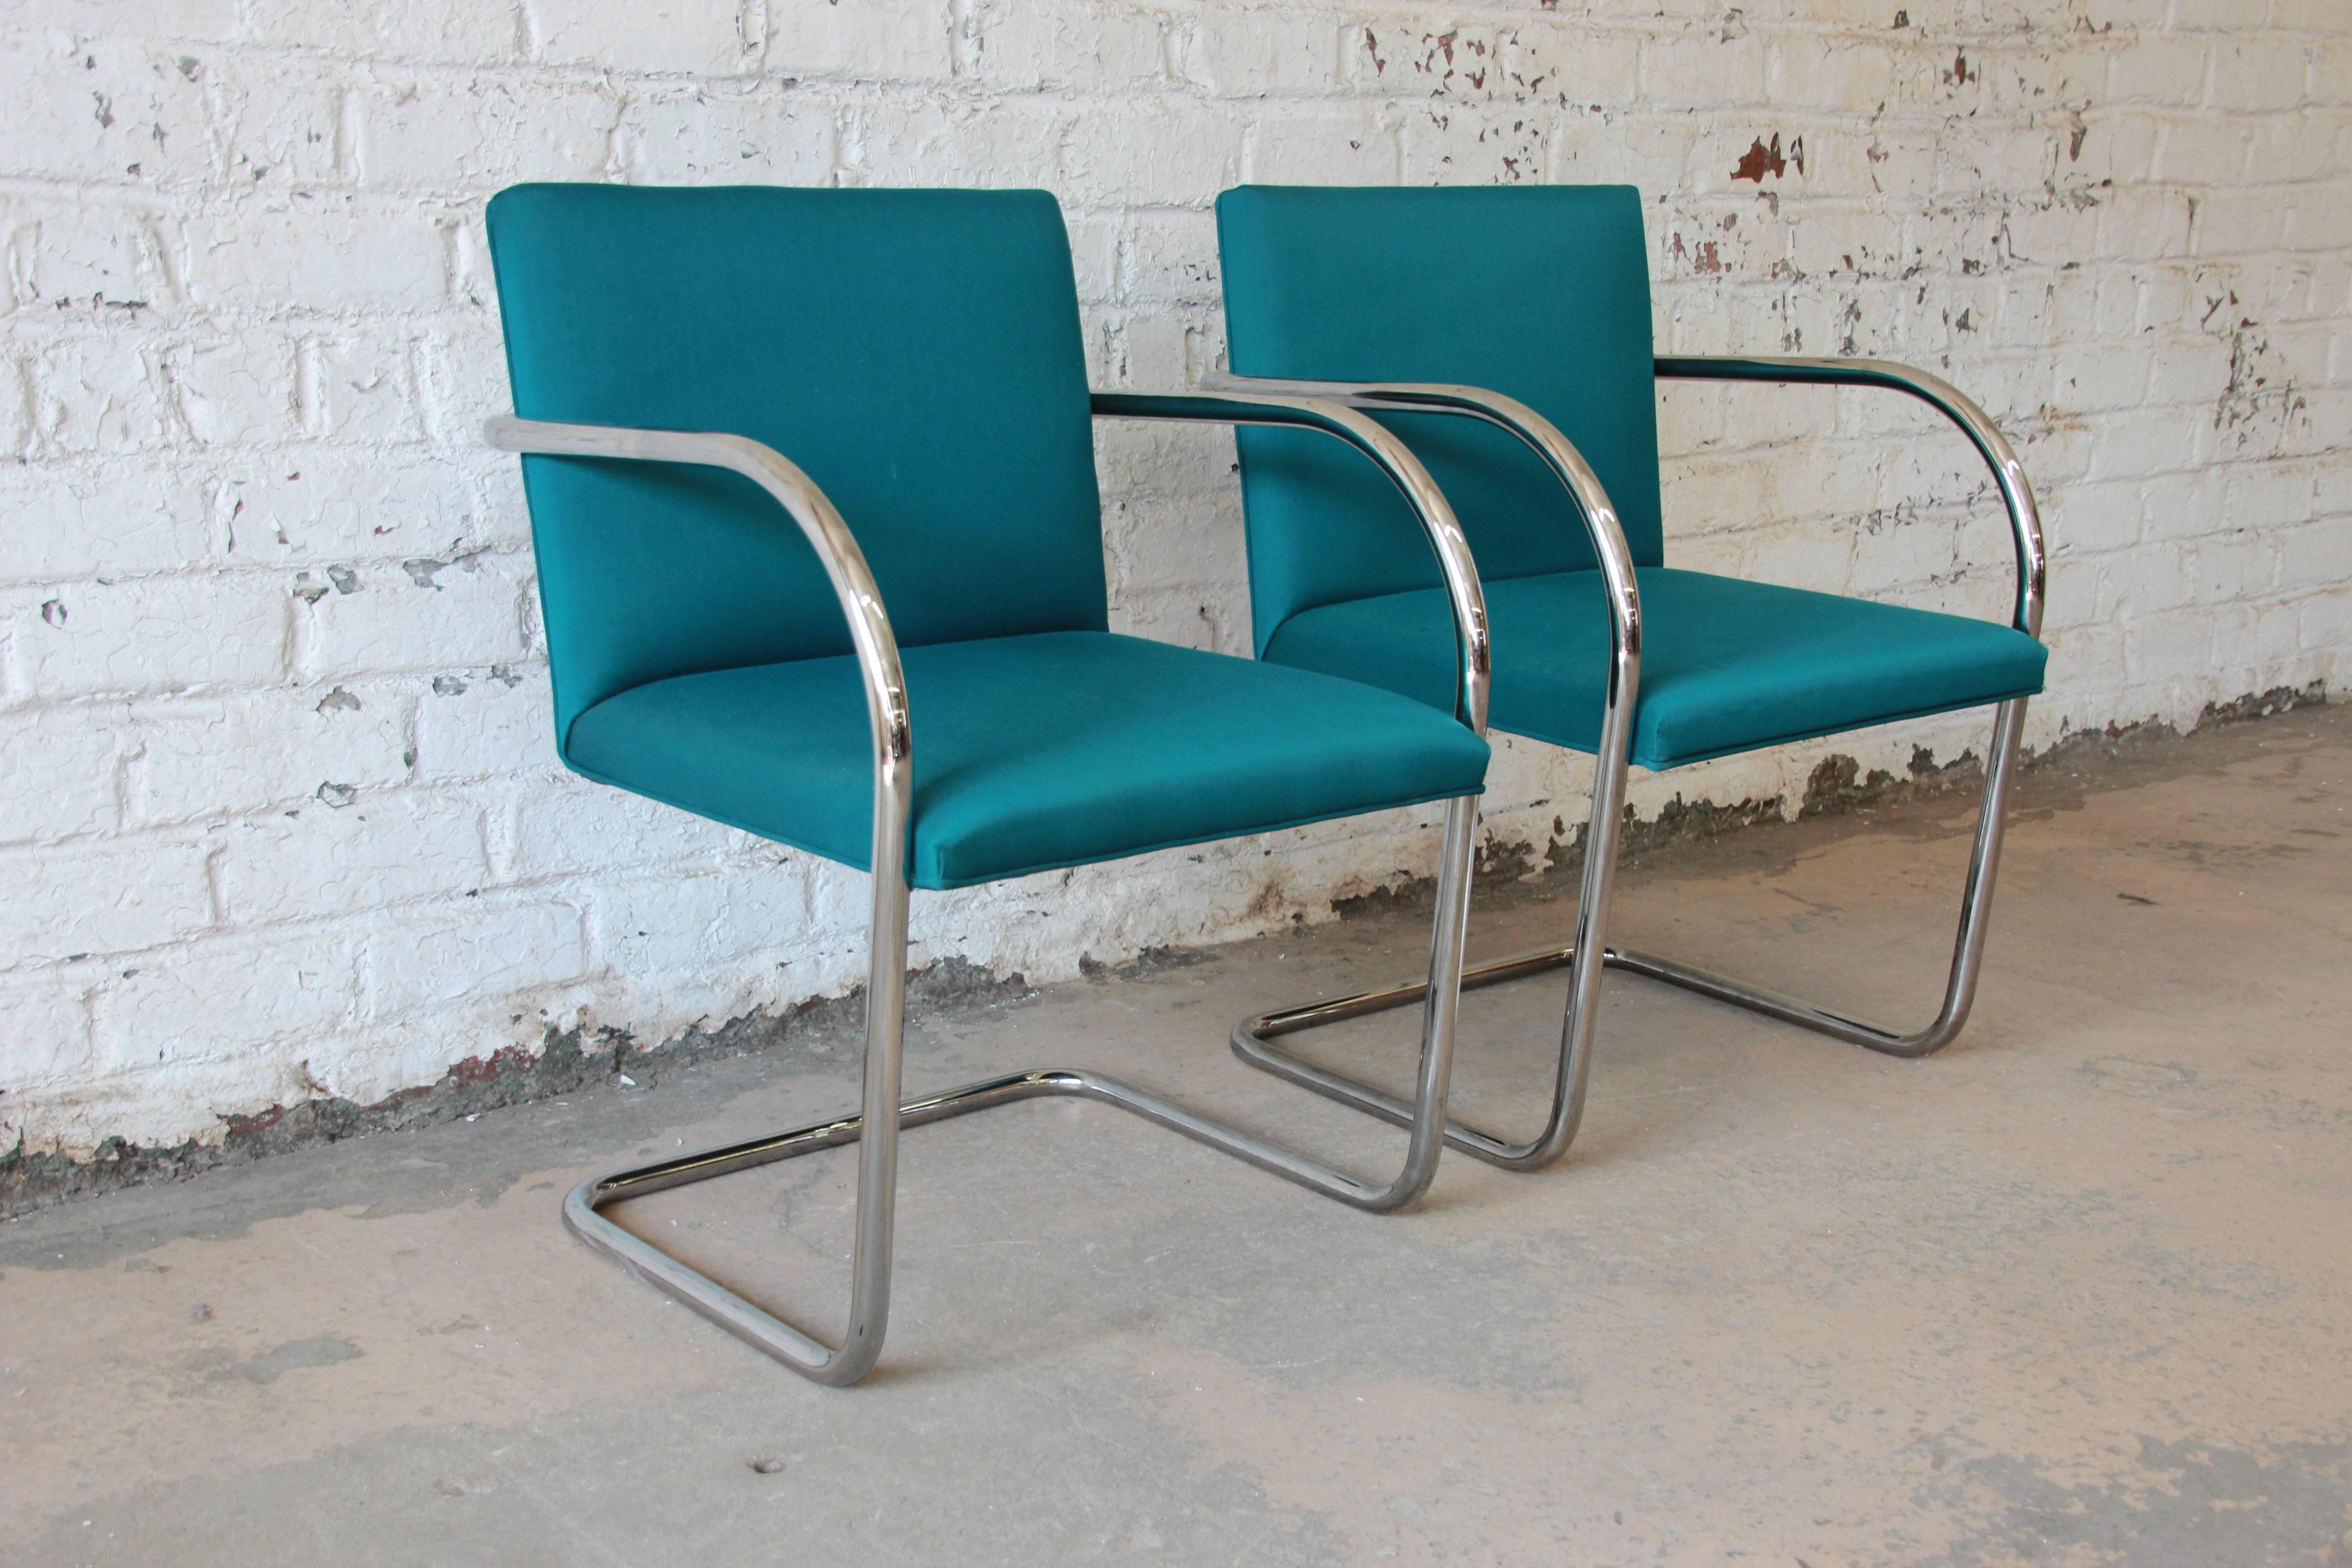 Plated Pair of Mies Van Der Rohe Brno Chairs for Knoll International